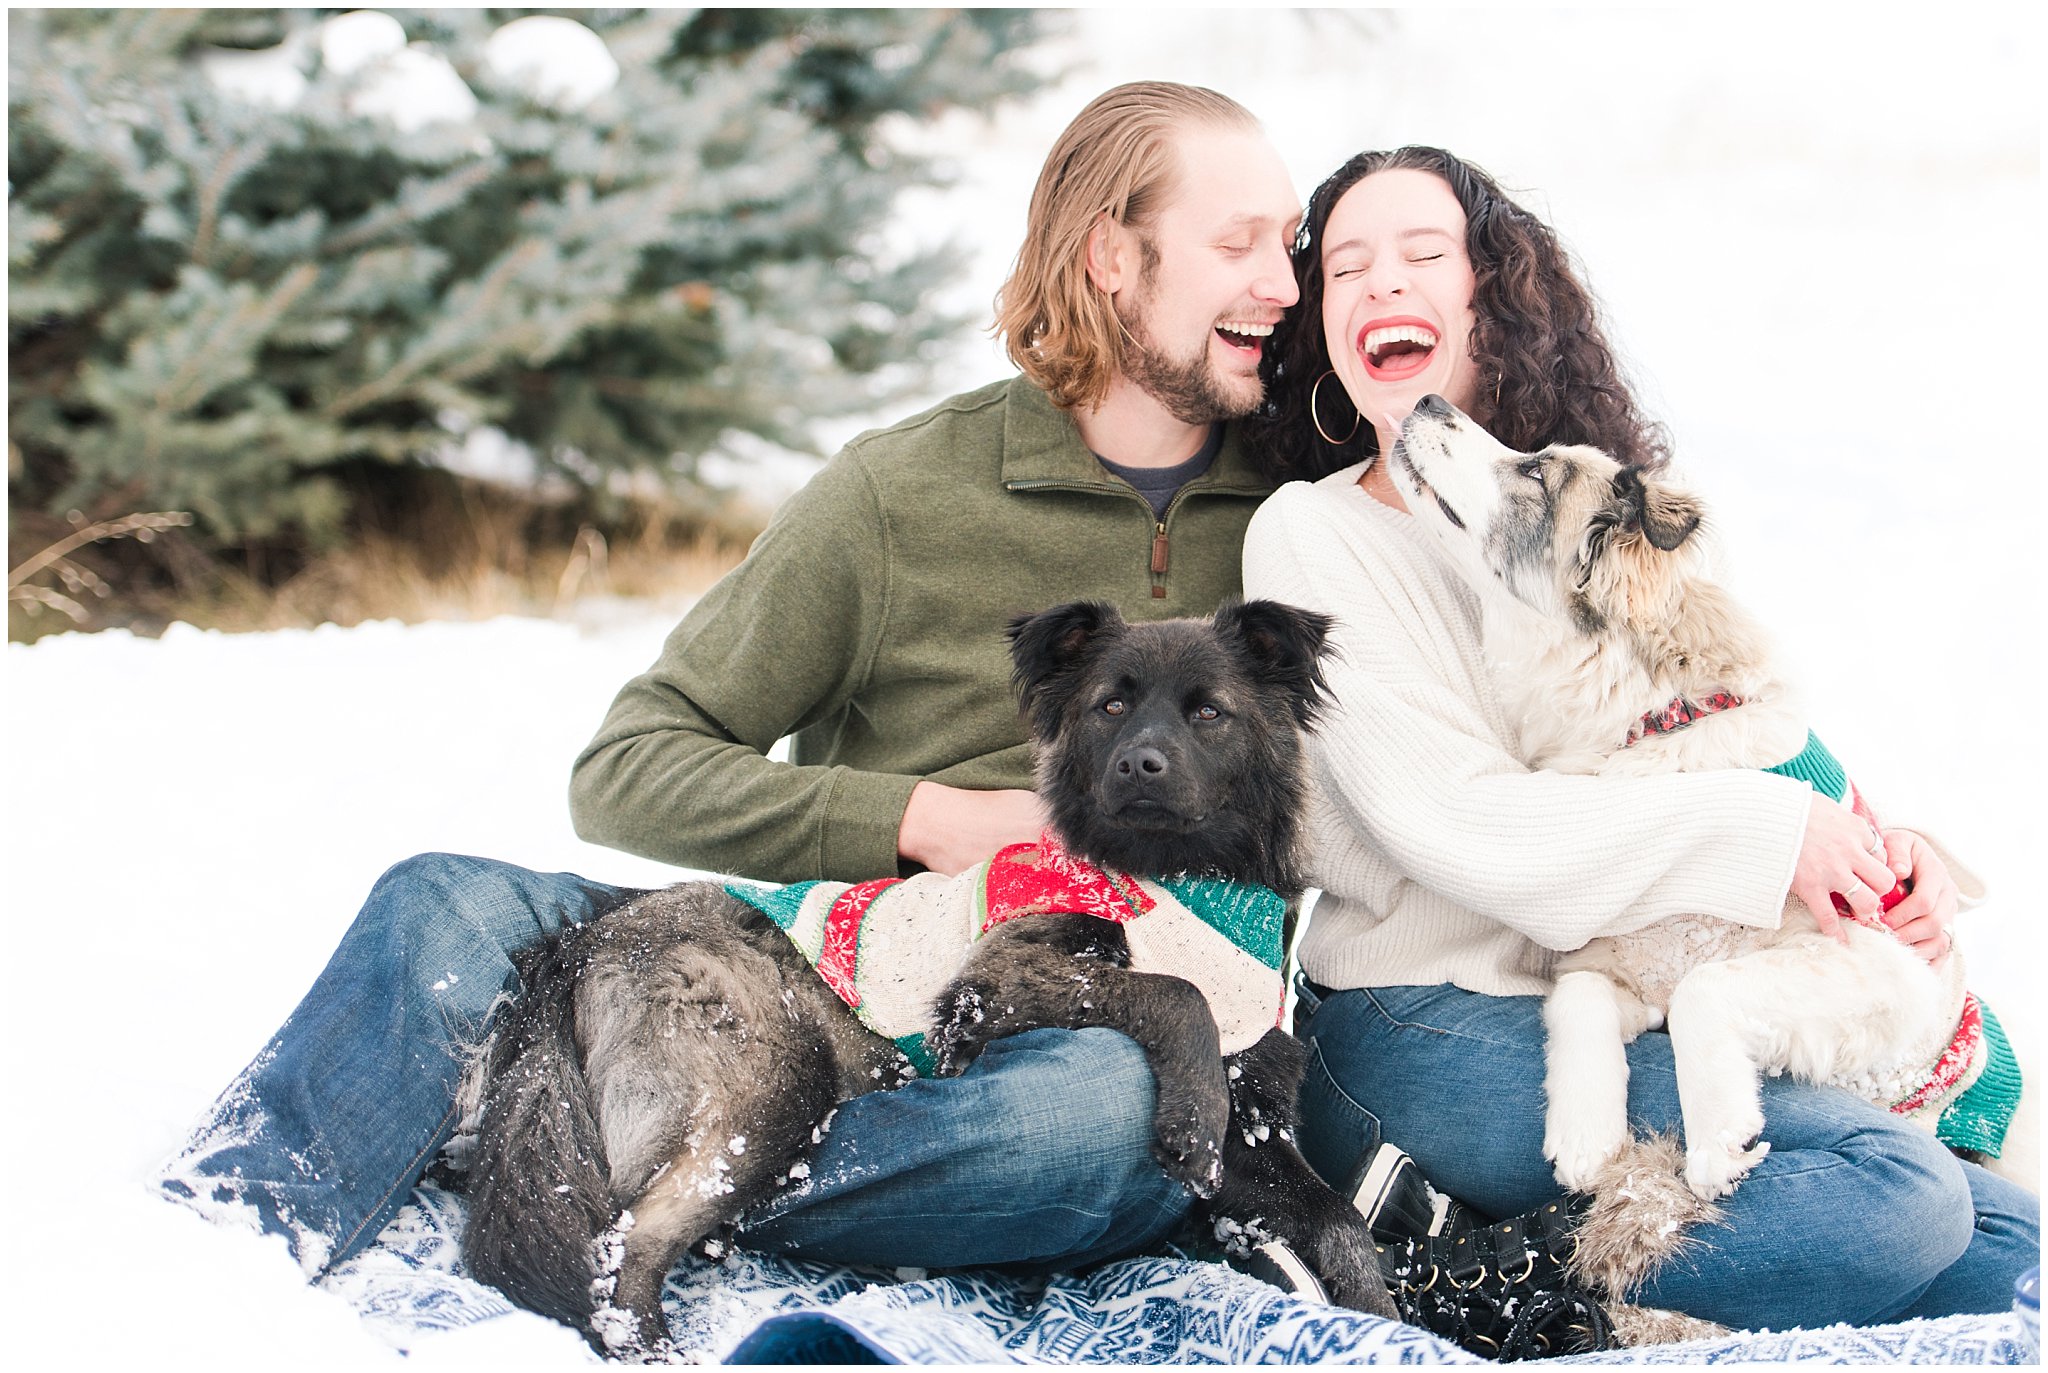 Couple laughing with puppies during winter engagement portrait session in the snow| Top Utah Wedding and Couples Photos 2019 | Jessie and Dallin Photography